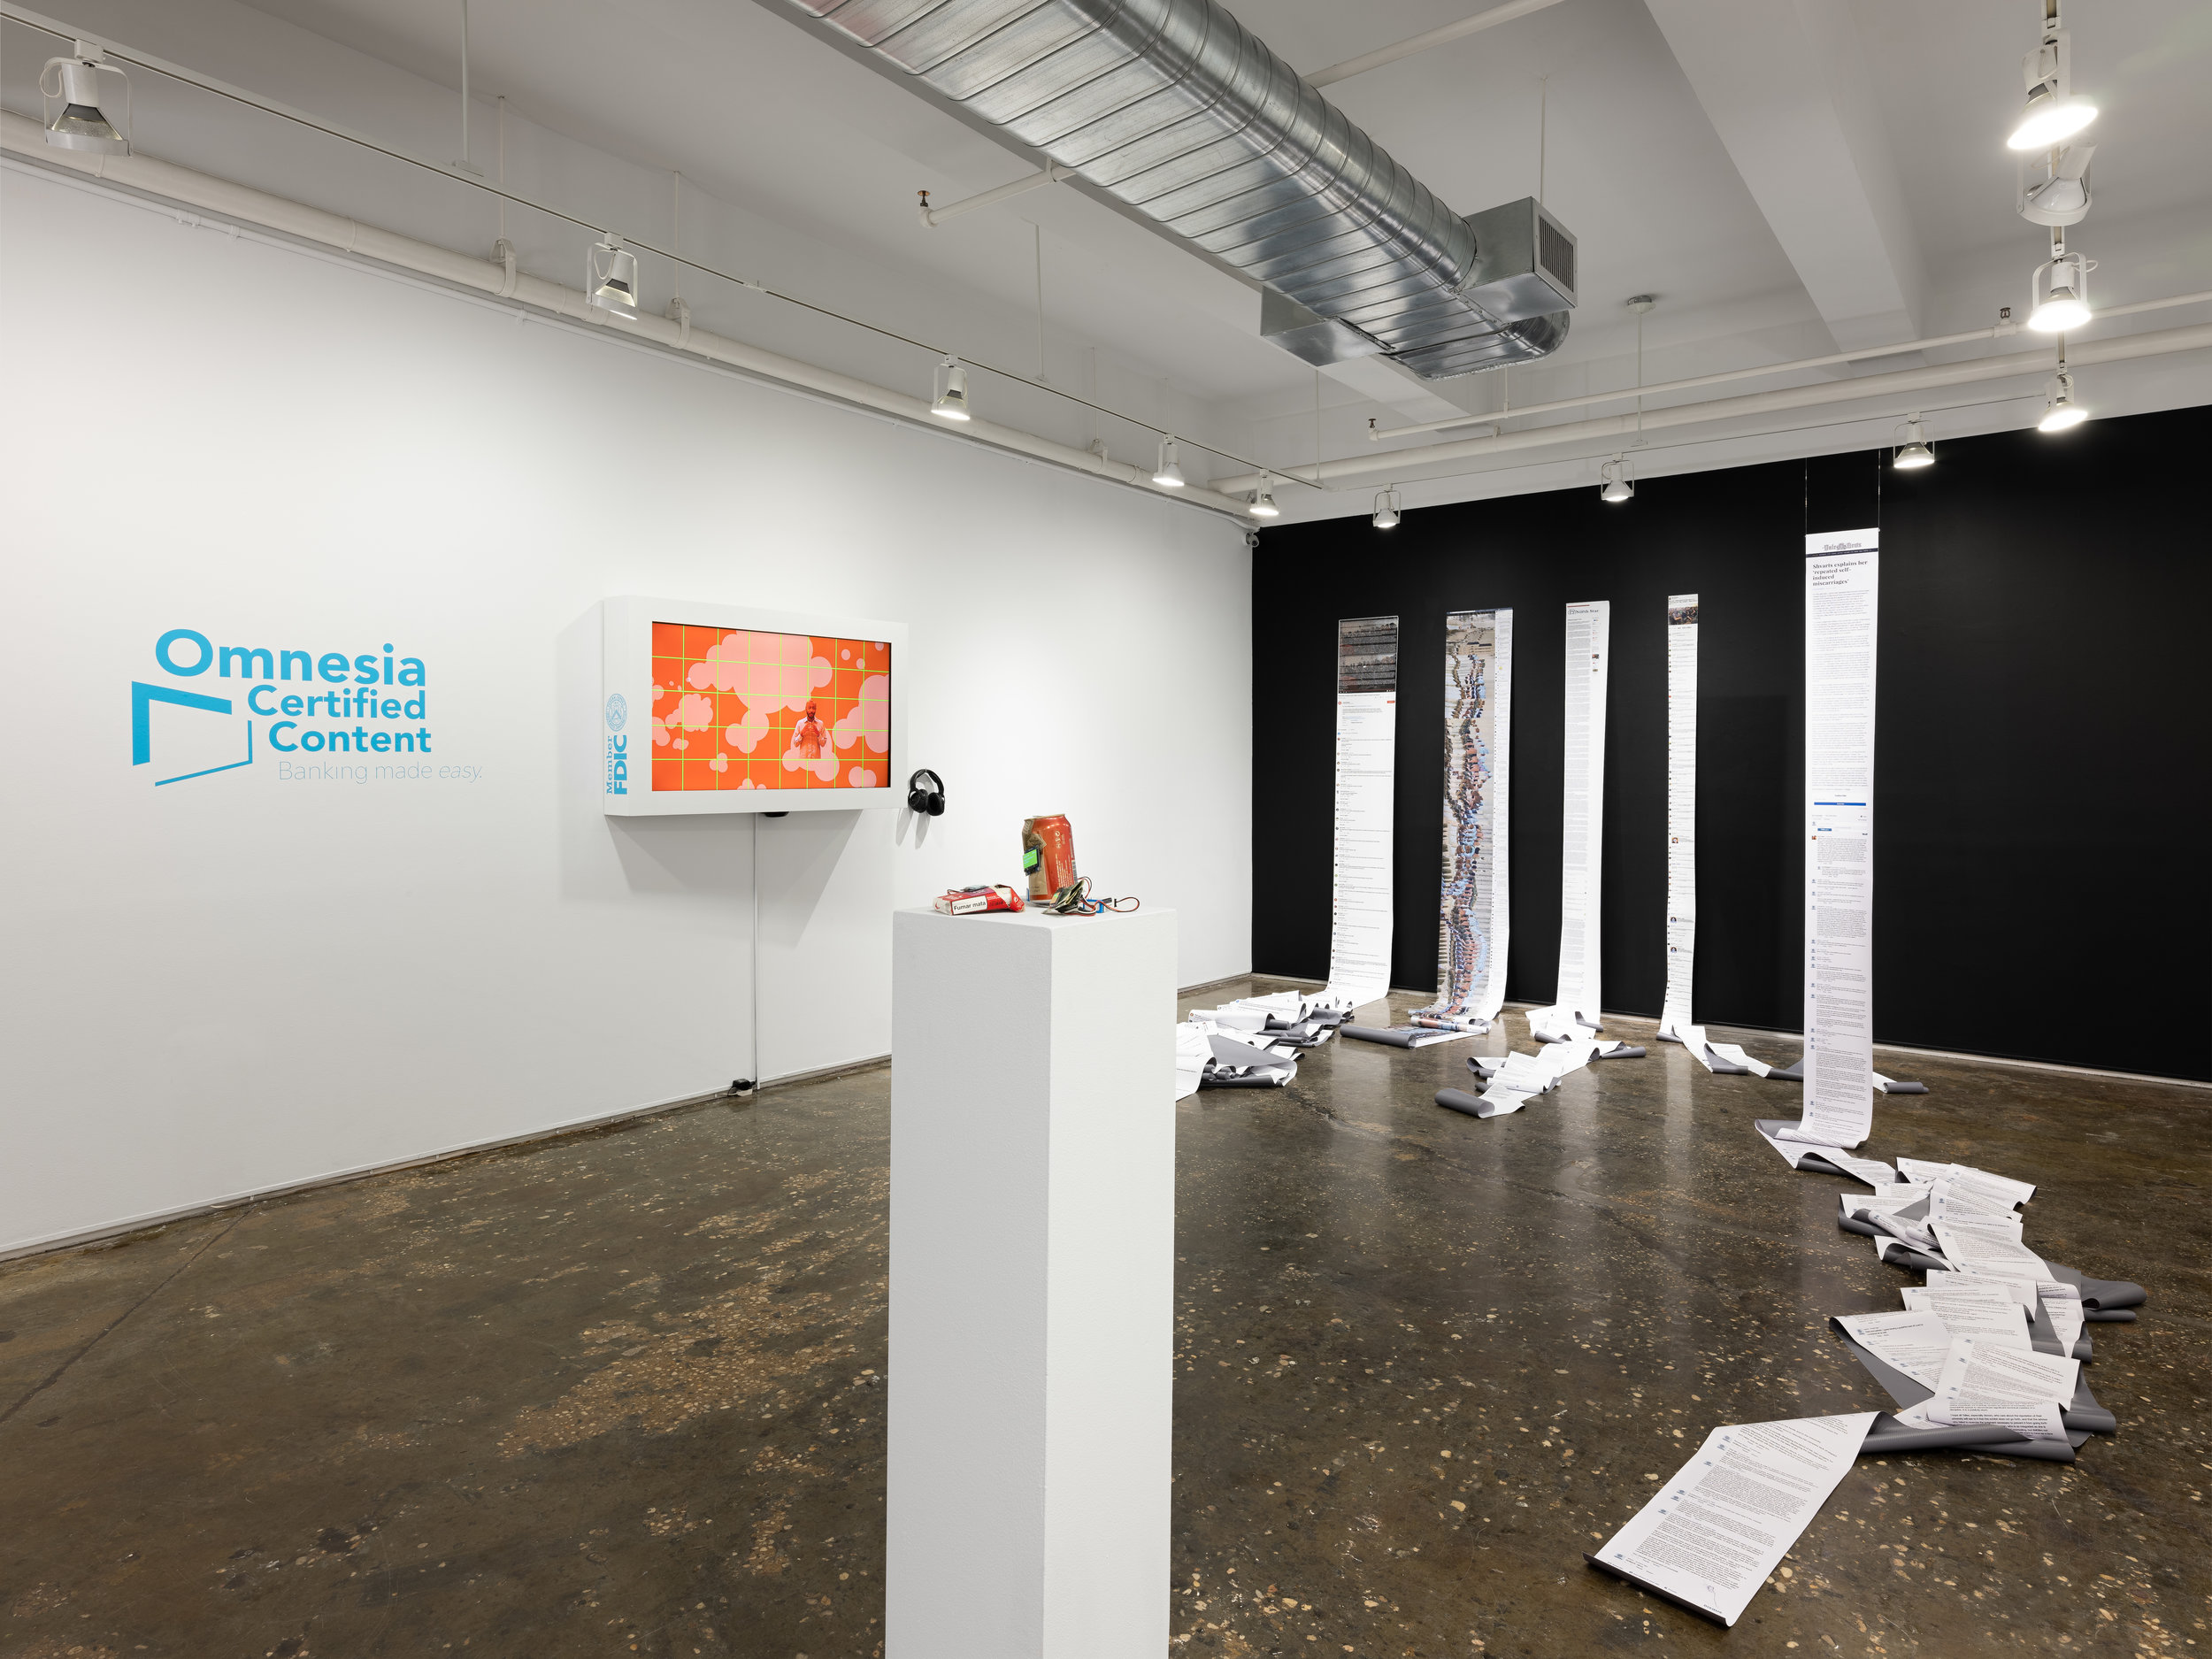  Installation view of  The Scalability Project . Photo by Sebastian Bach. 